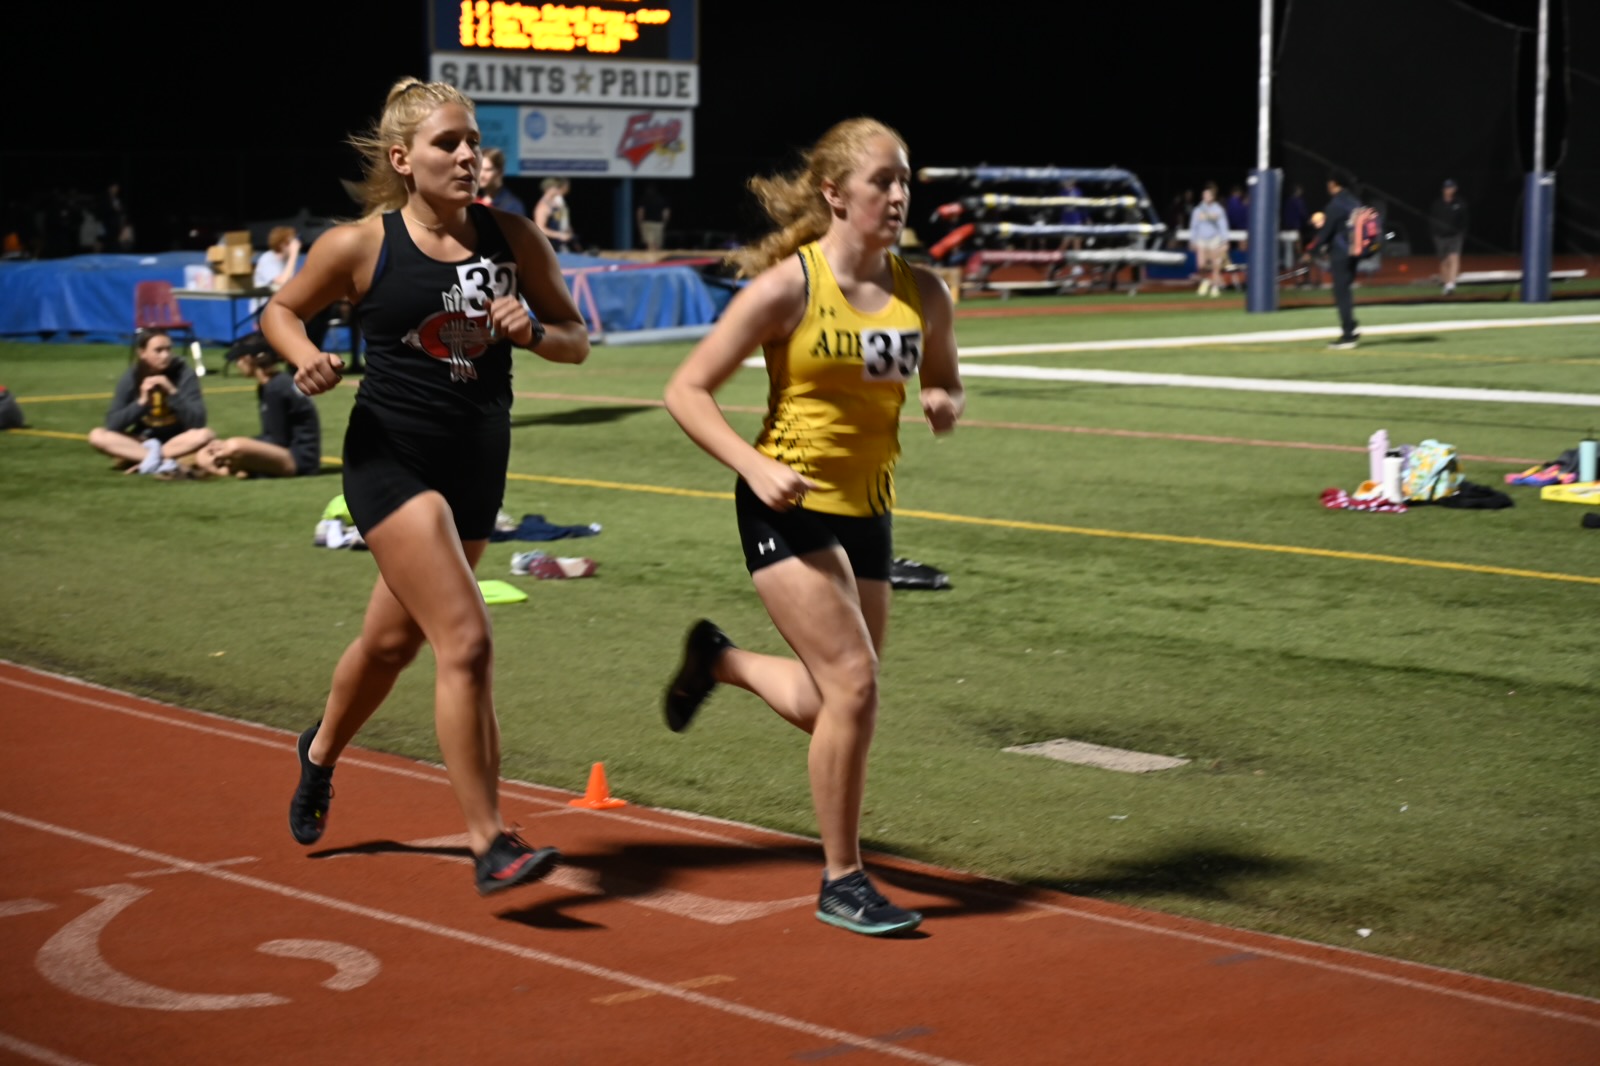 Women's Track and Field competes at Don Kleinow Invitational; Belinsky earns NCCAA Qualification